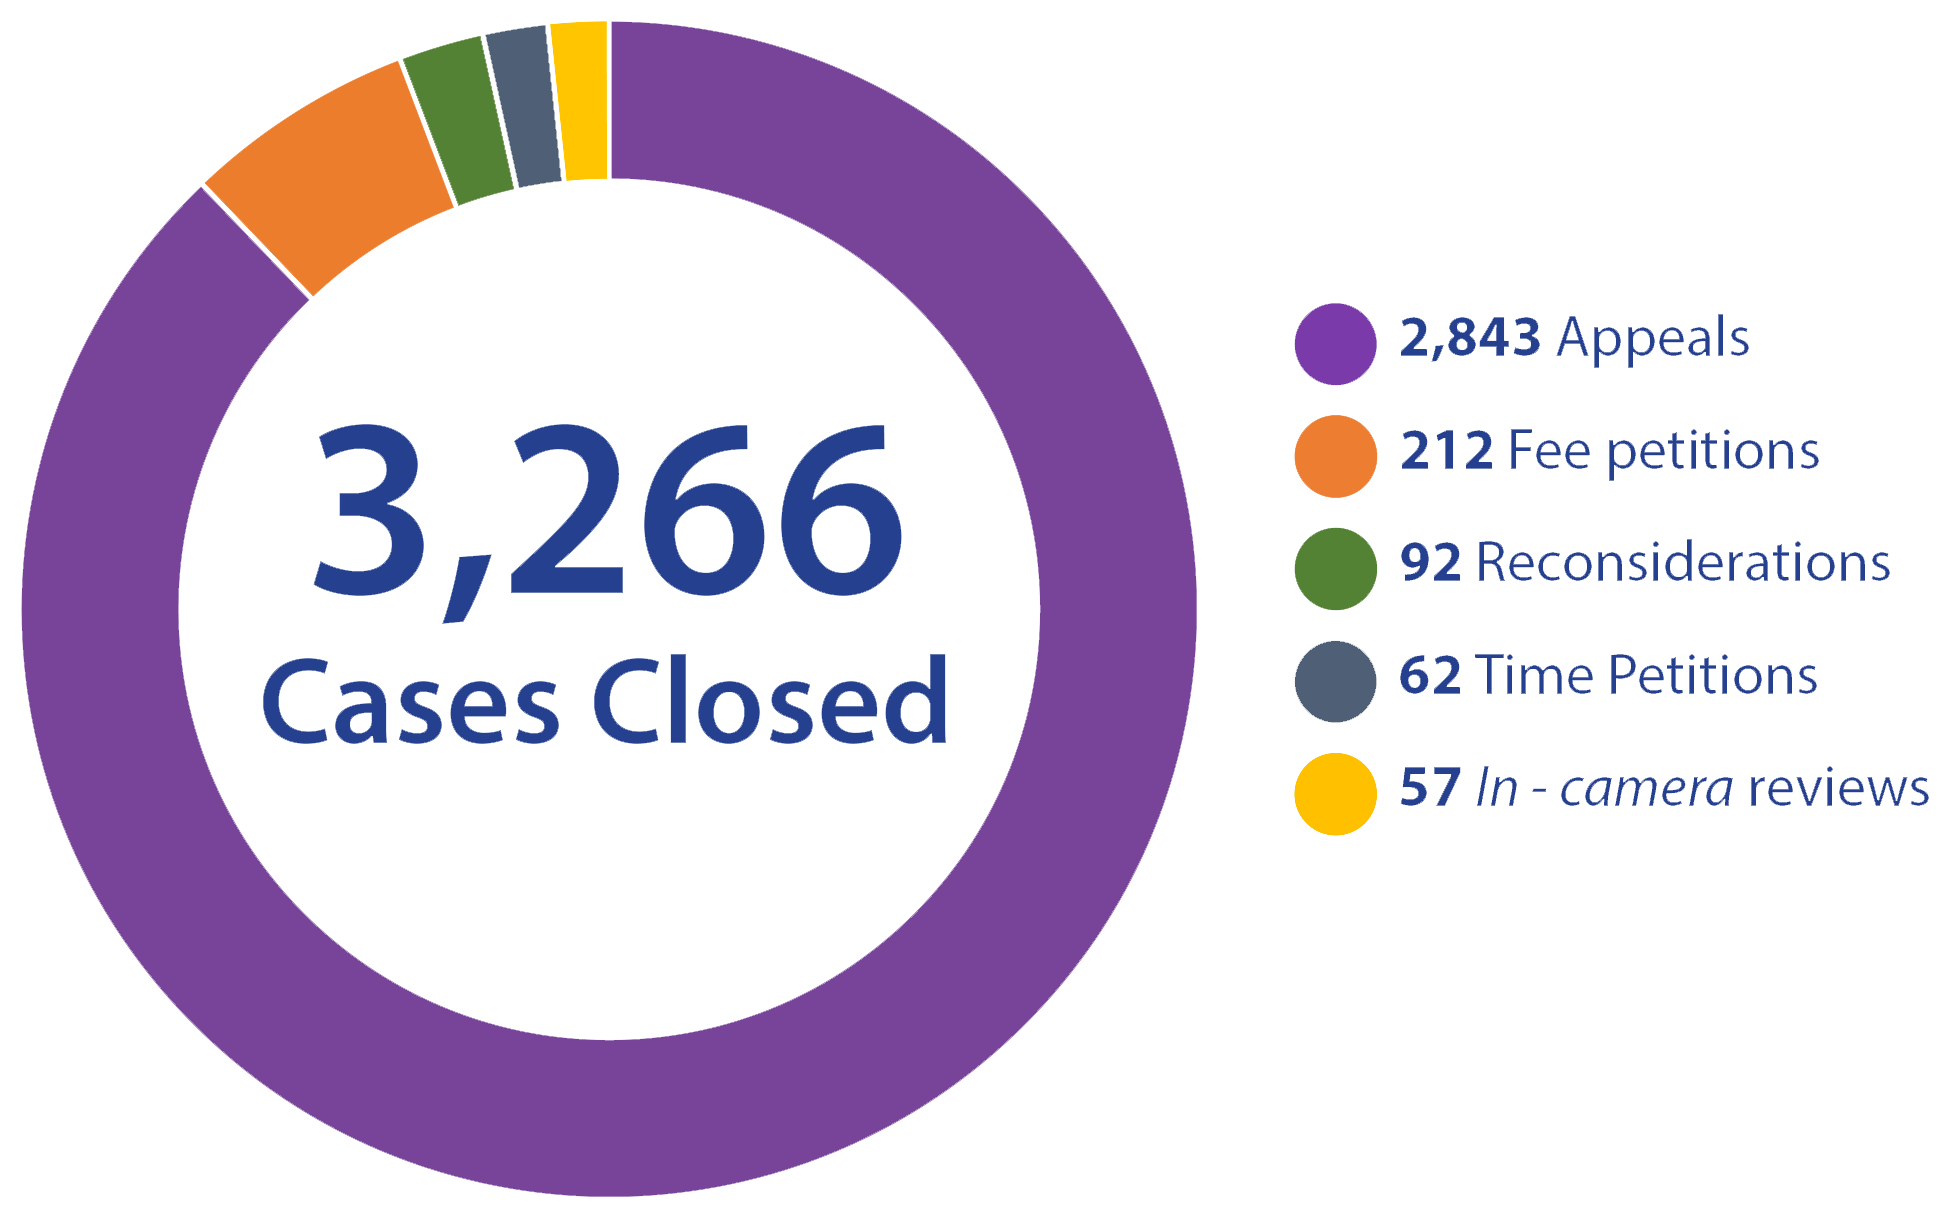 A pie chart titled: Cases Closed with the number 3,266 displayed large. To the right is a bullet list which contains this text: Appeals: 2,843.
Fee petitions: 212.
Time petitions: 62.
In-camera review: 57.
Reconsiderations: 92.

